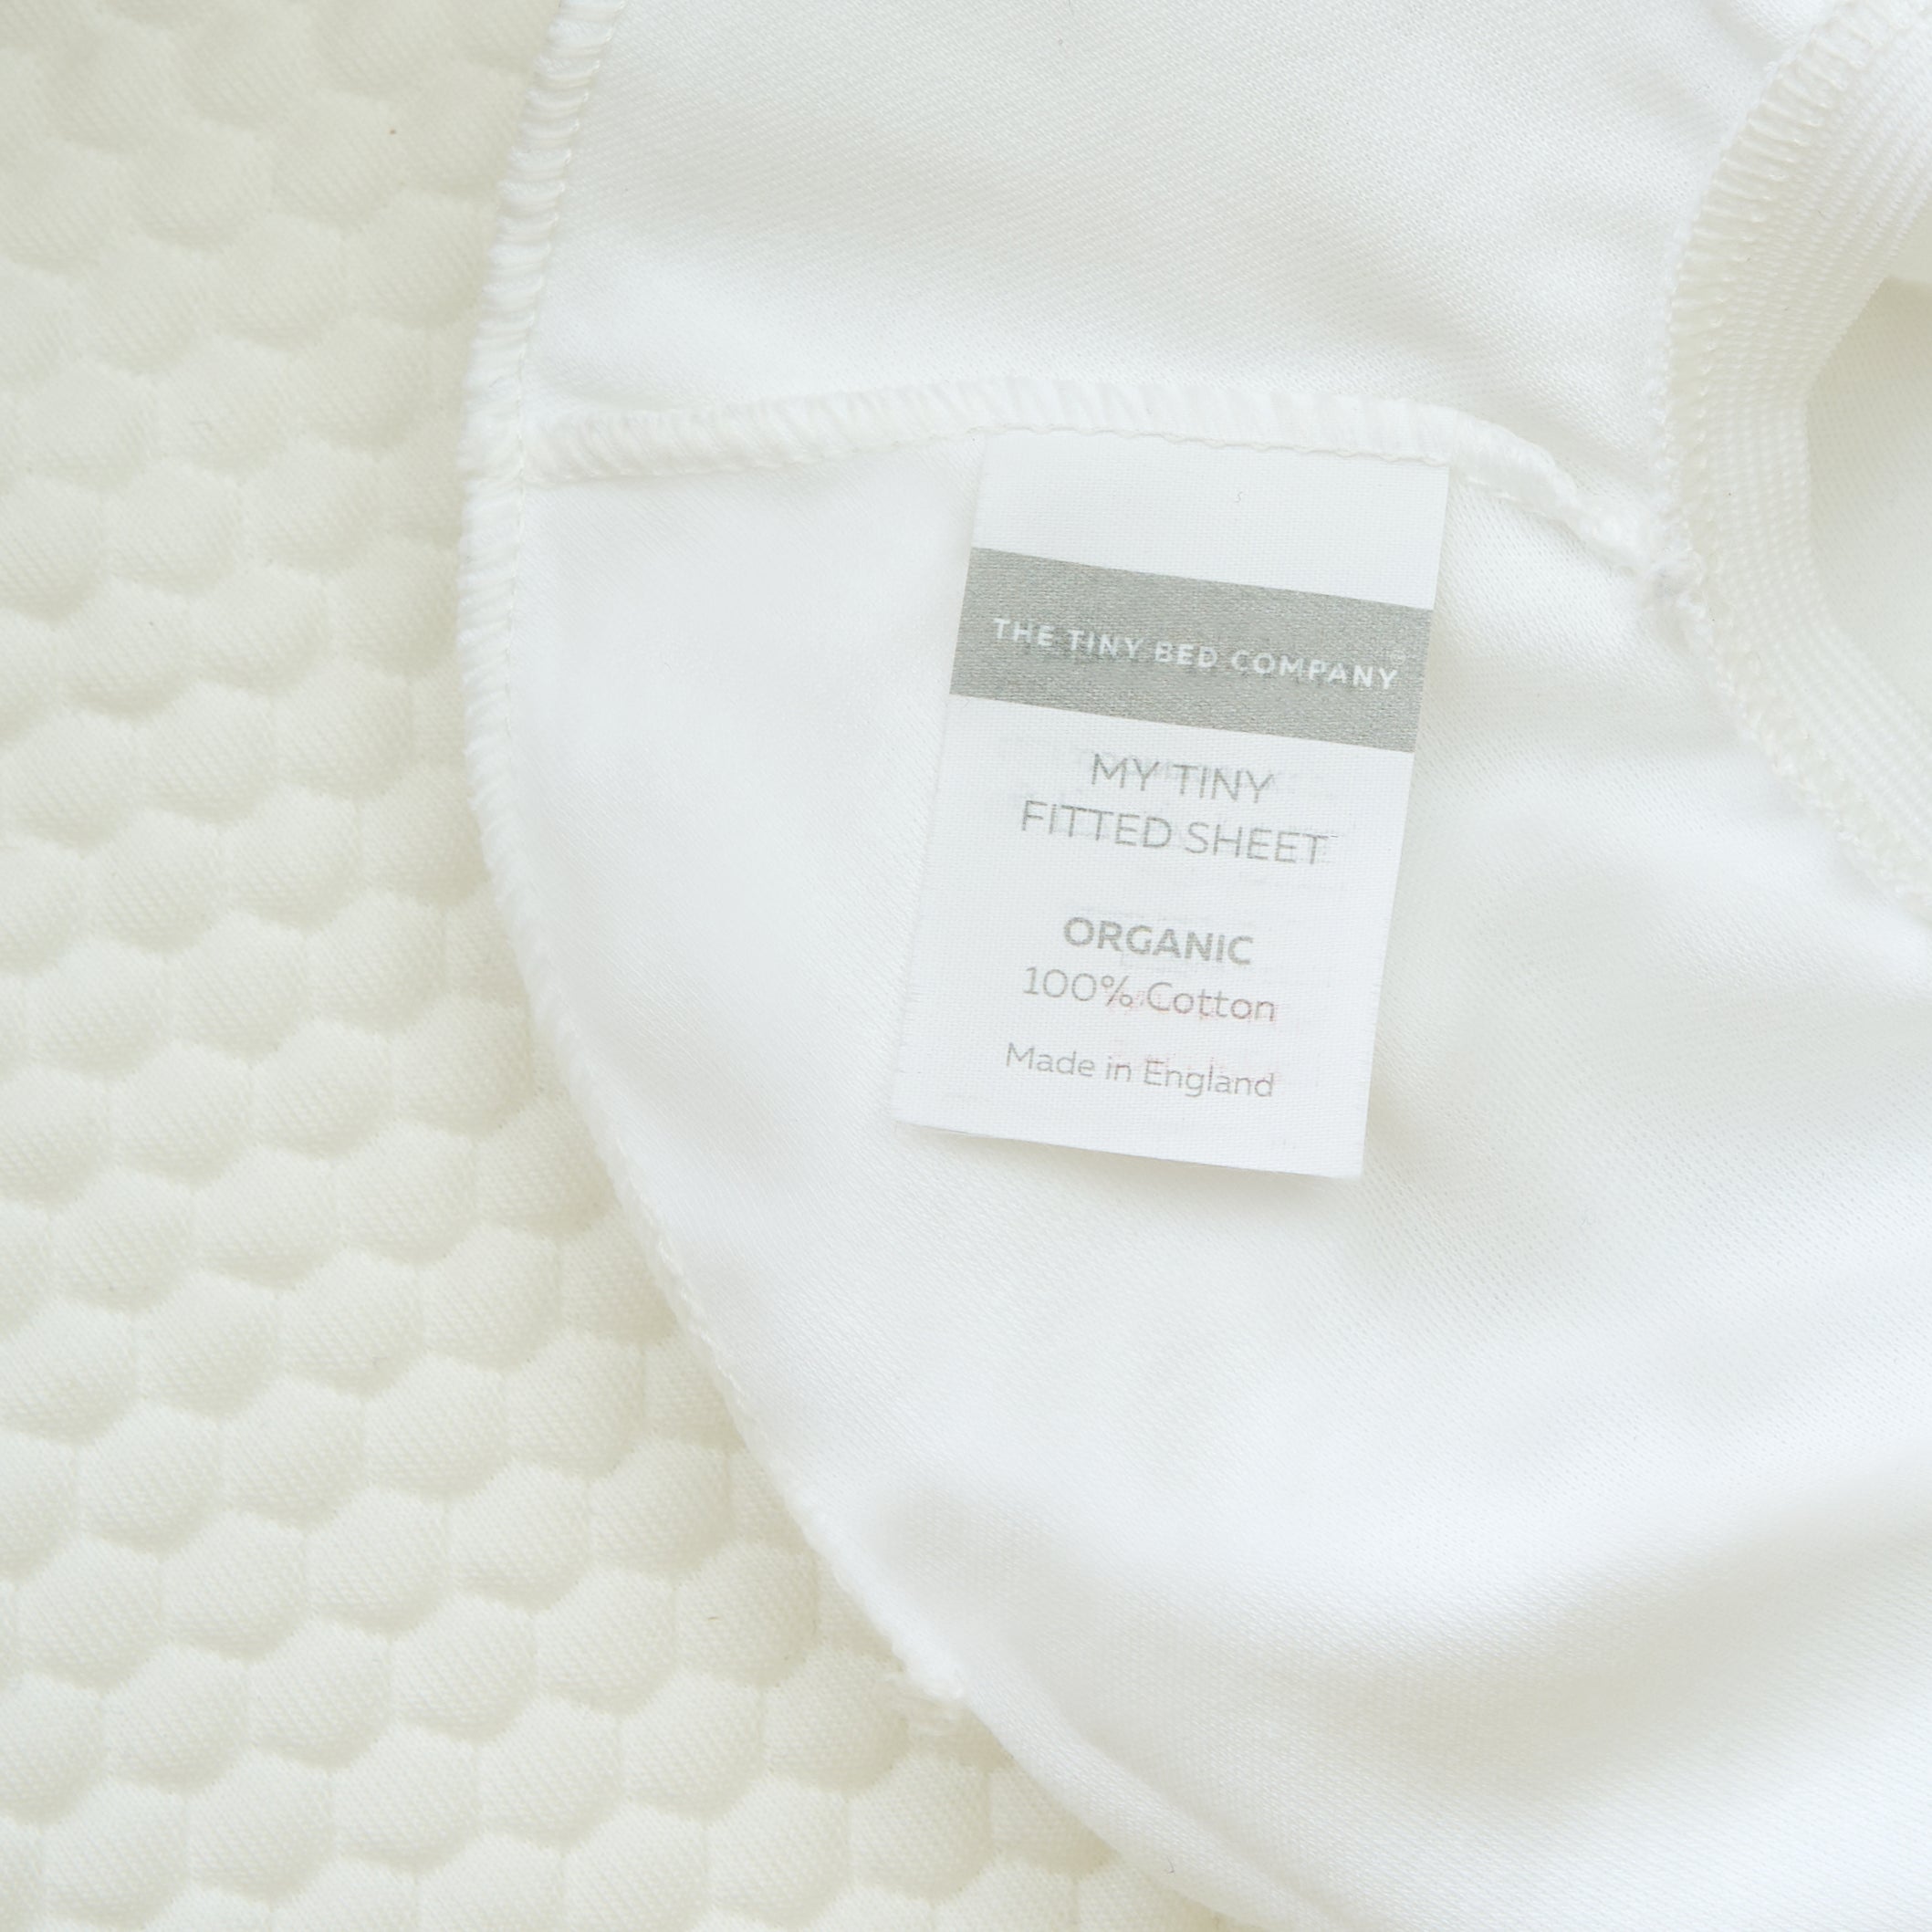 Premium Quality Certified Organic 100% Cotton Fitted Sheet To Fit Maxi-Cosi Swift (97 x 78cm) - The Tiny Bed Company™